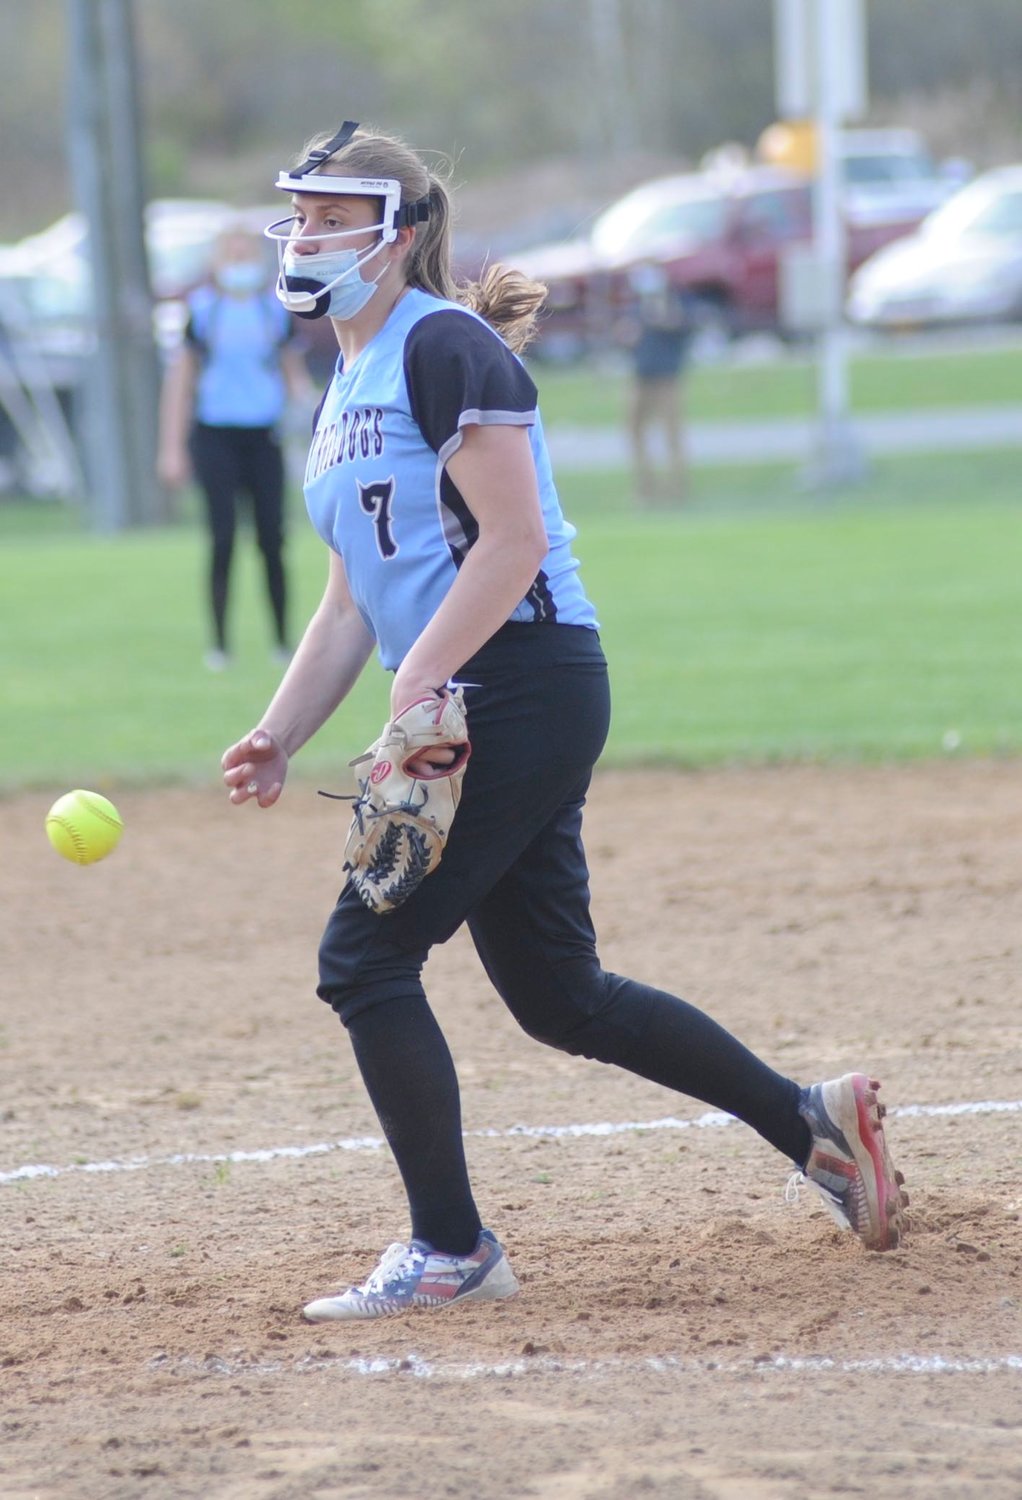 Riley Ernst was named Sullivan West’s Miss Softball 2021. When not on the mound, she was a powerful defense force to be reckoned with as her varsity soccer squad’s goalie.